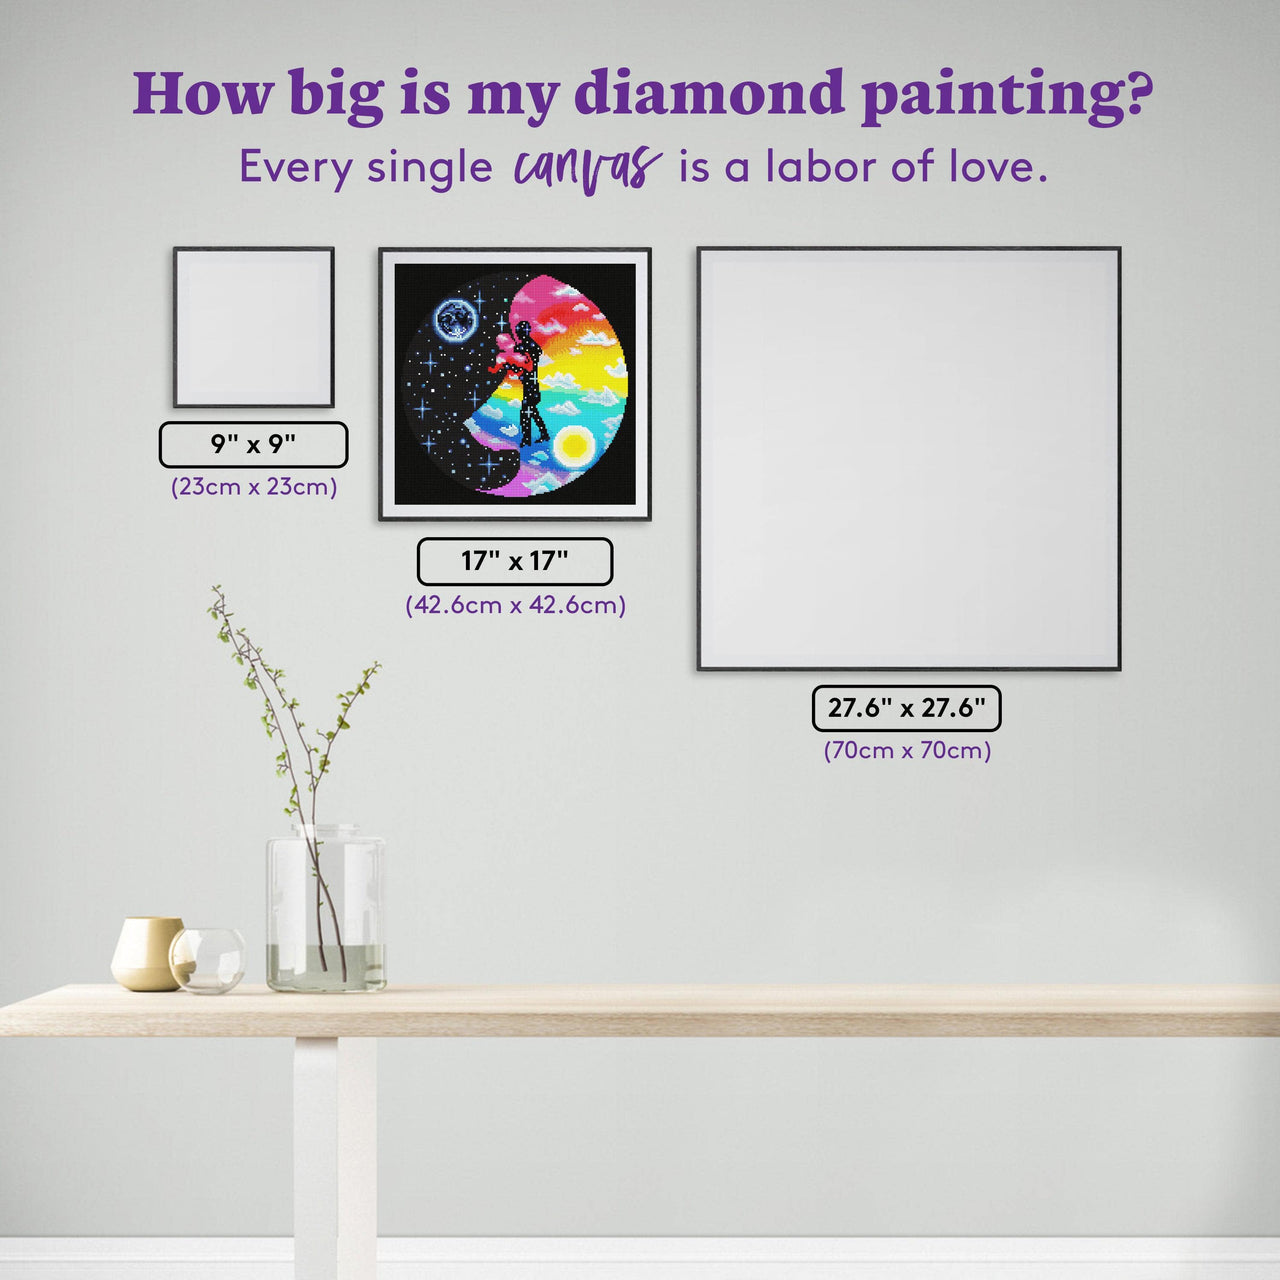 Diamond Painting Cosmic Dance 17" x 17" (42.6cm x 42.6cm) / Round with 37 Colors including 4 ABs and 1 Fairy Dust Diamonds / 22,697